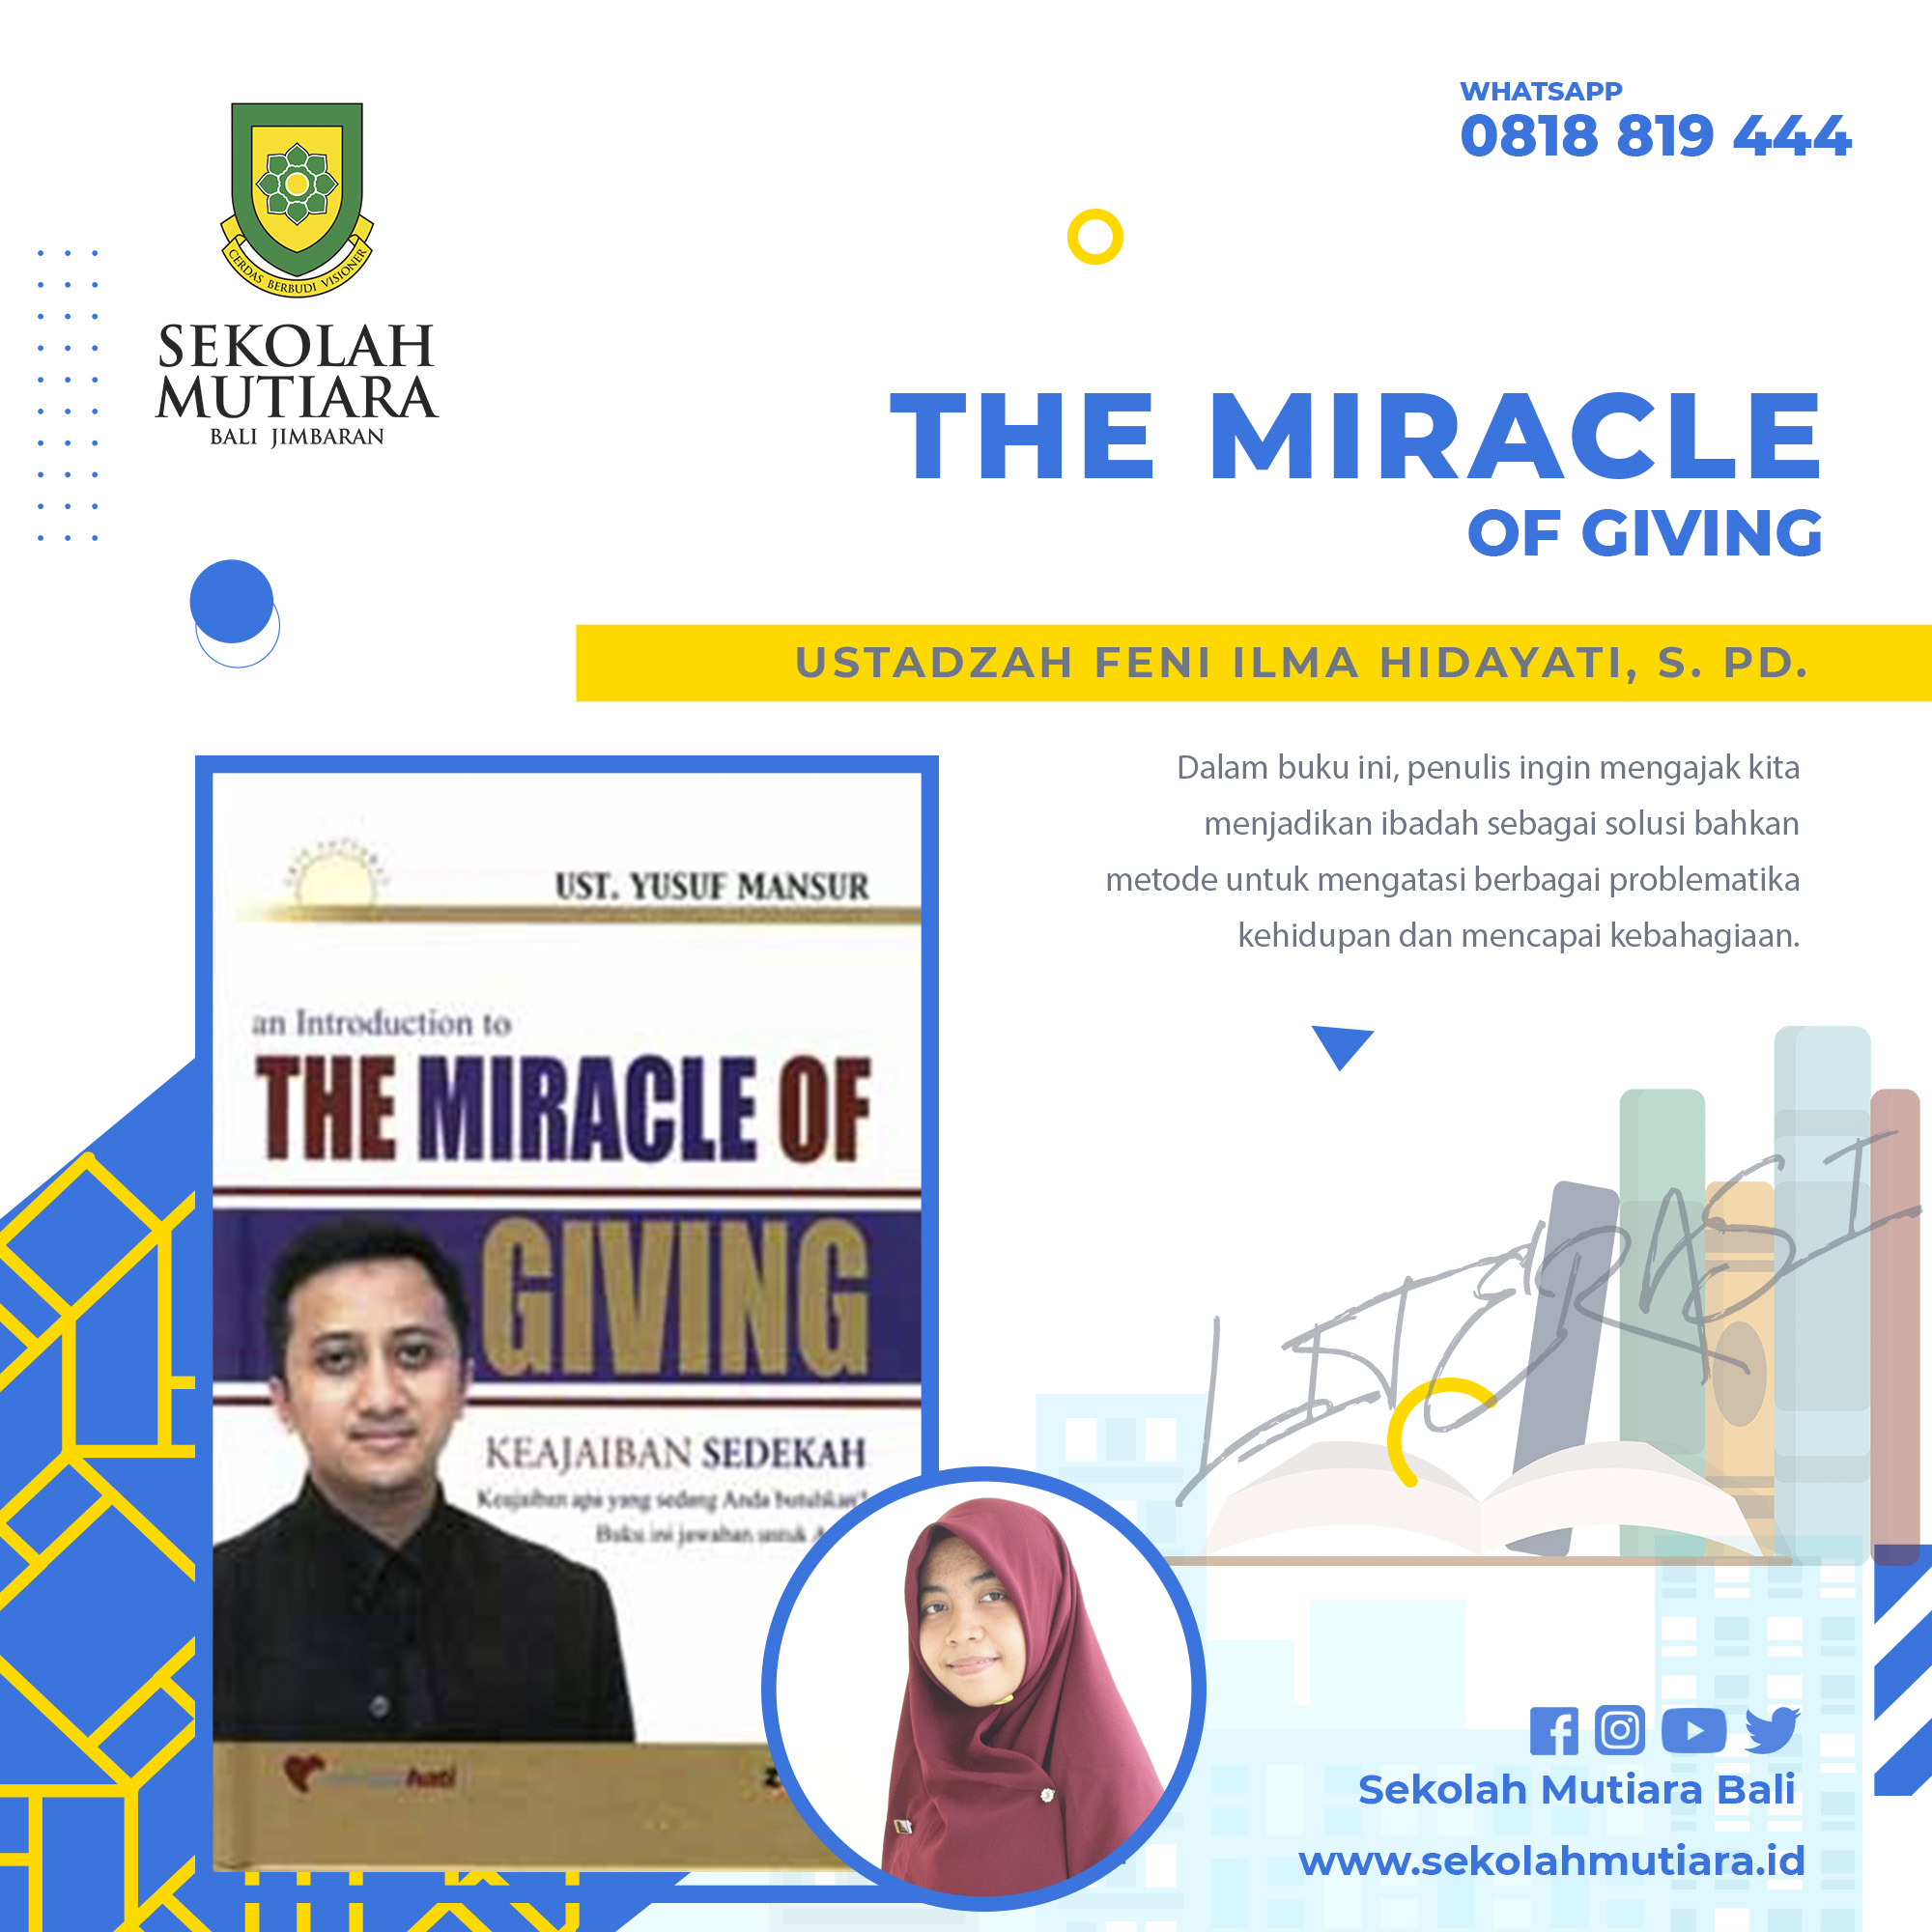 THE MIRACLE OF GIVING